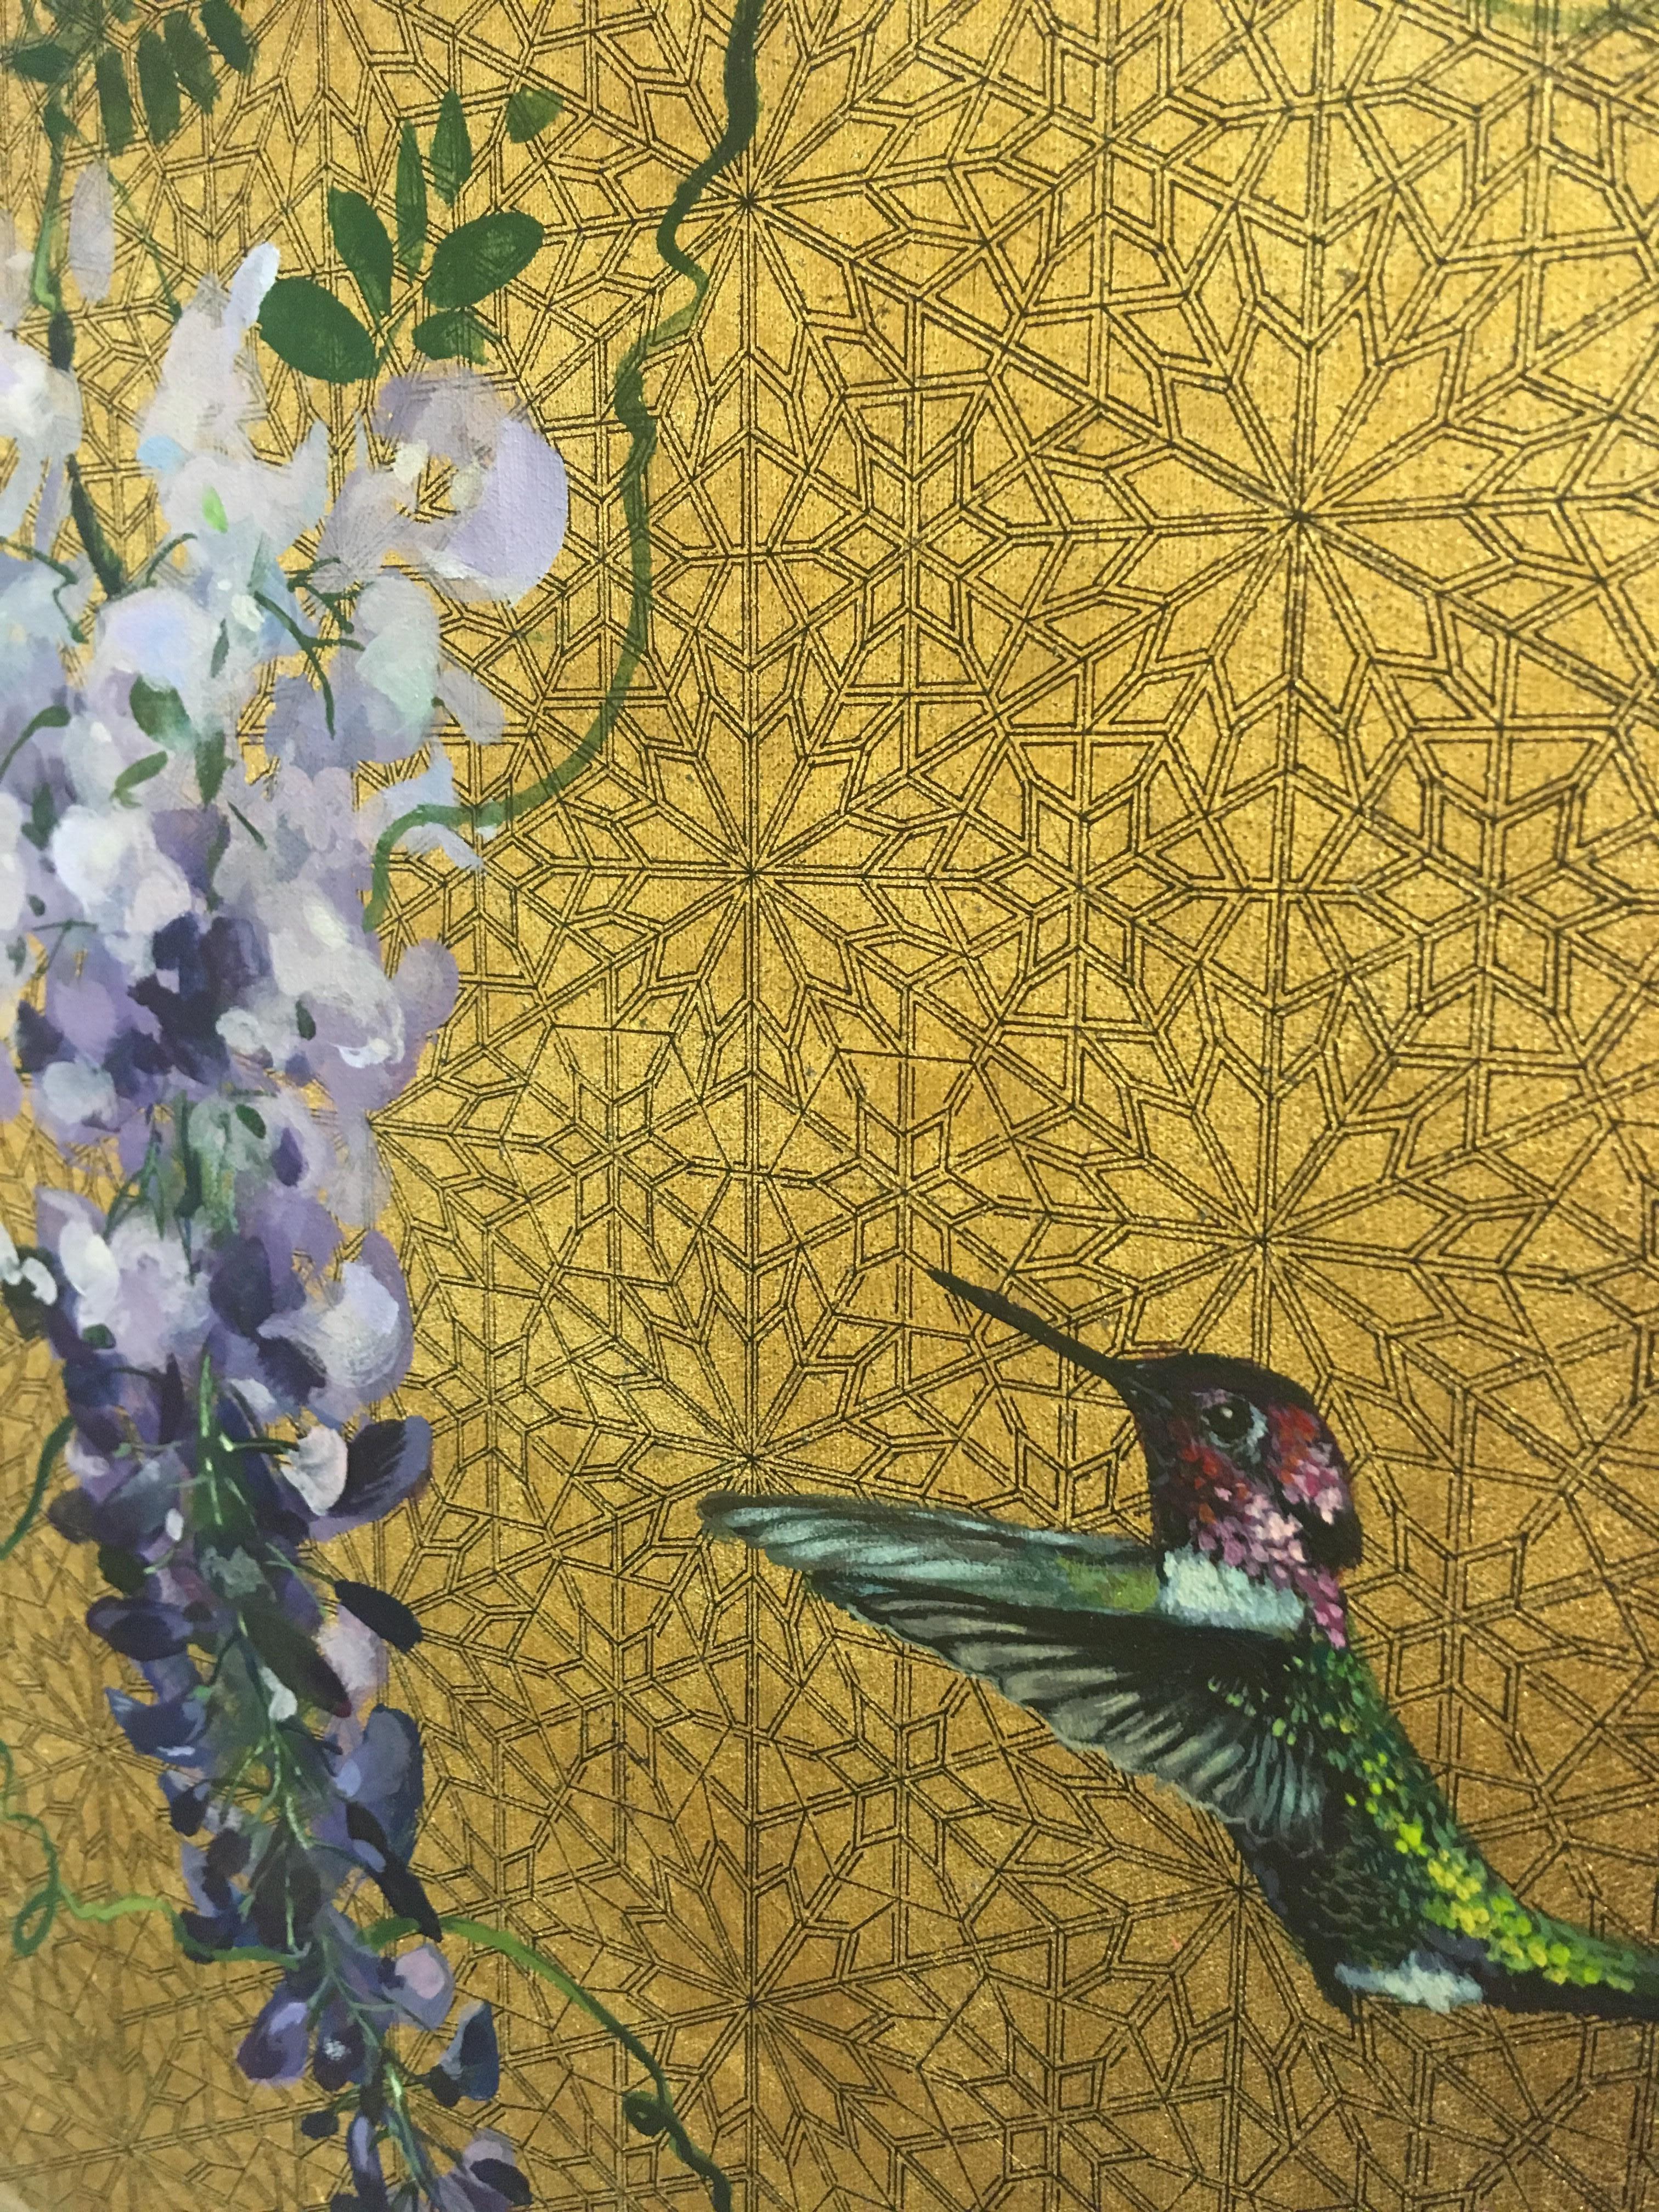 Oro 25 - collaborative work, decorative mixed media with gold, birds and flowers - Painting by Keng Wai Lee & Marco Araldi